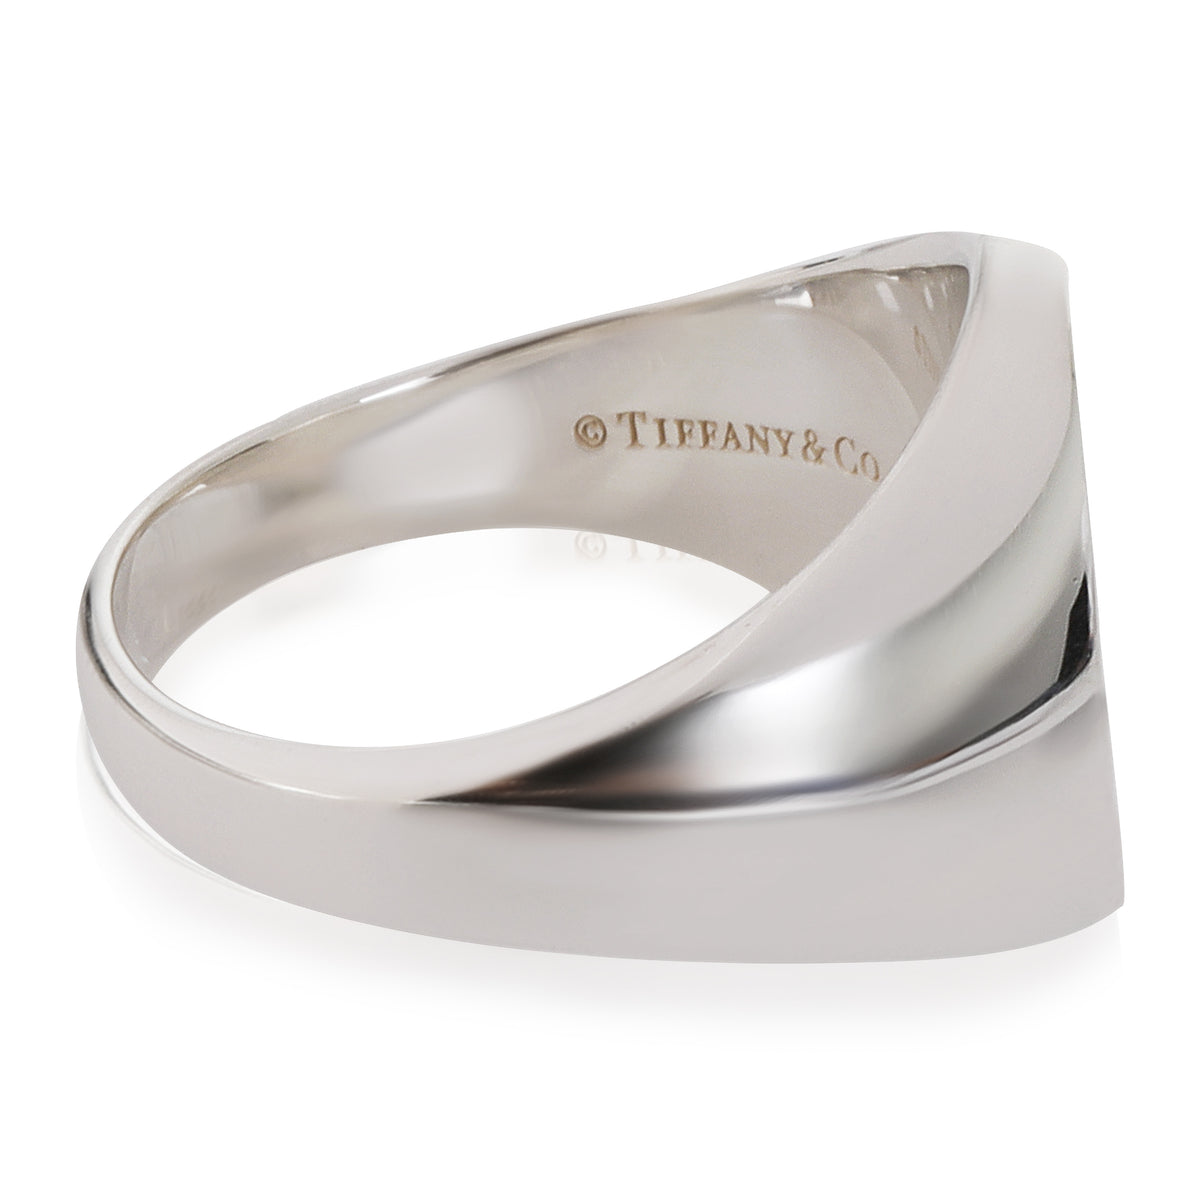 Tiffany & Co. Top Pinky Ring in  Sterling Silver